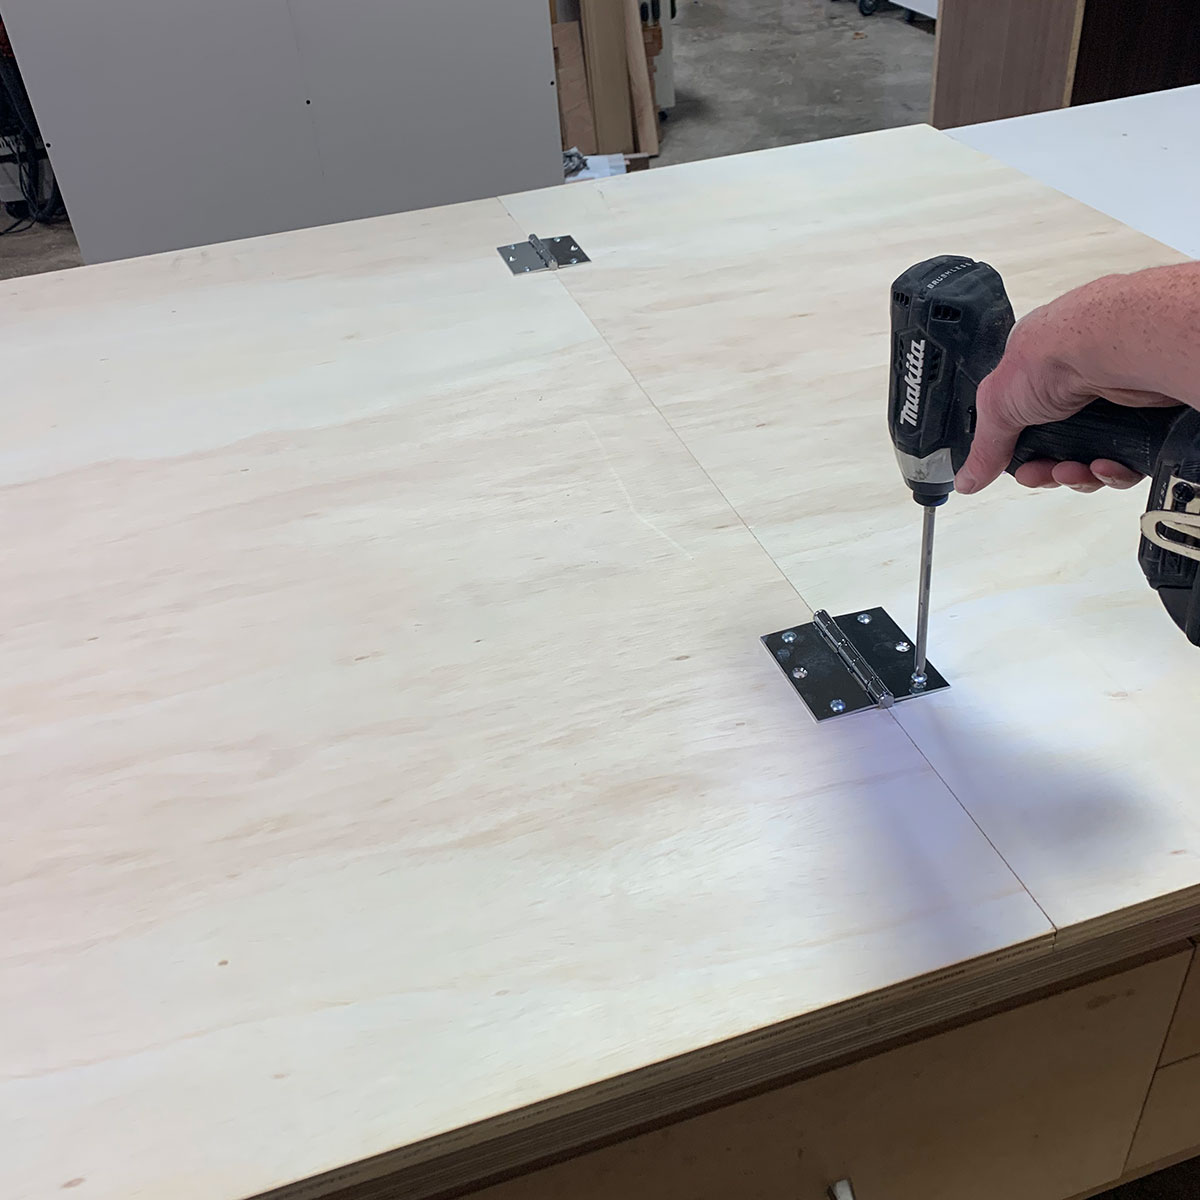 A woodworker screwing hinges on plywood to make a workbench top.